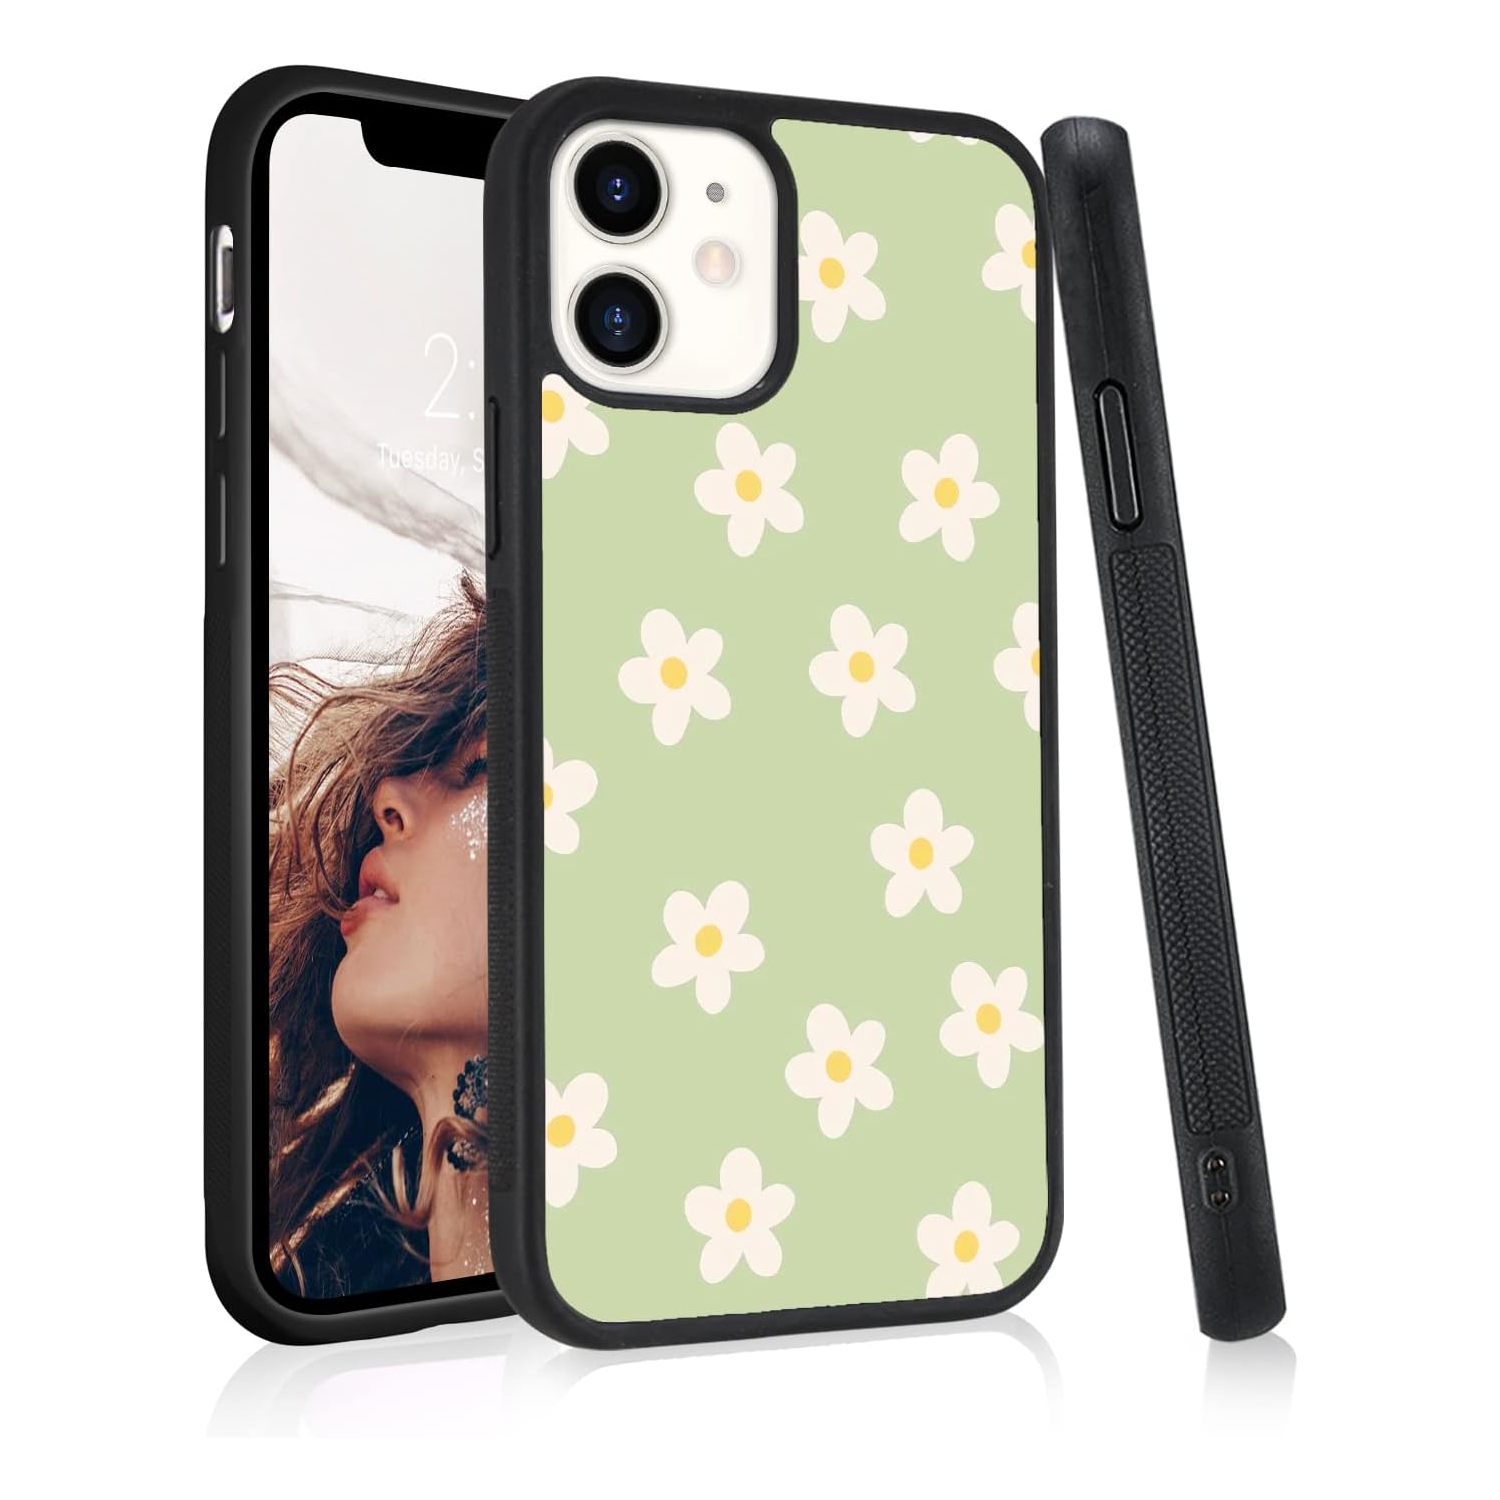 Green White Flower Pattern for iPhone 6/6s Case Shockproof Anti-Scratch Protective Cover Soft TPU Hard Back Cute Slim